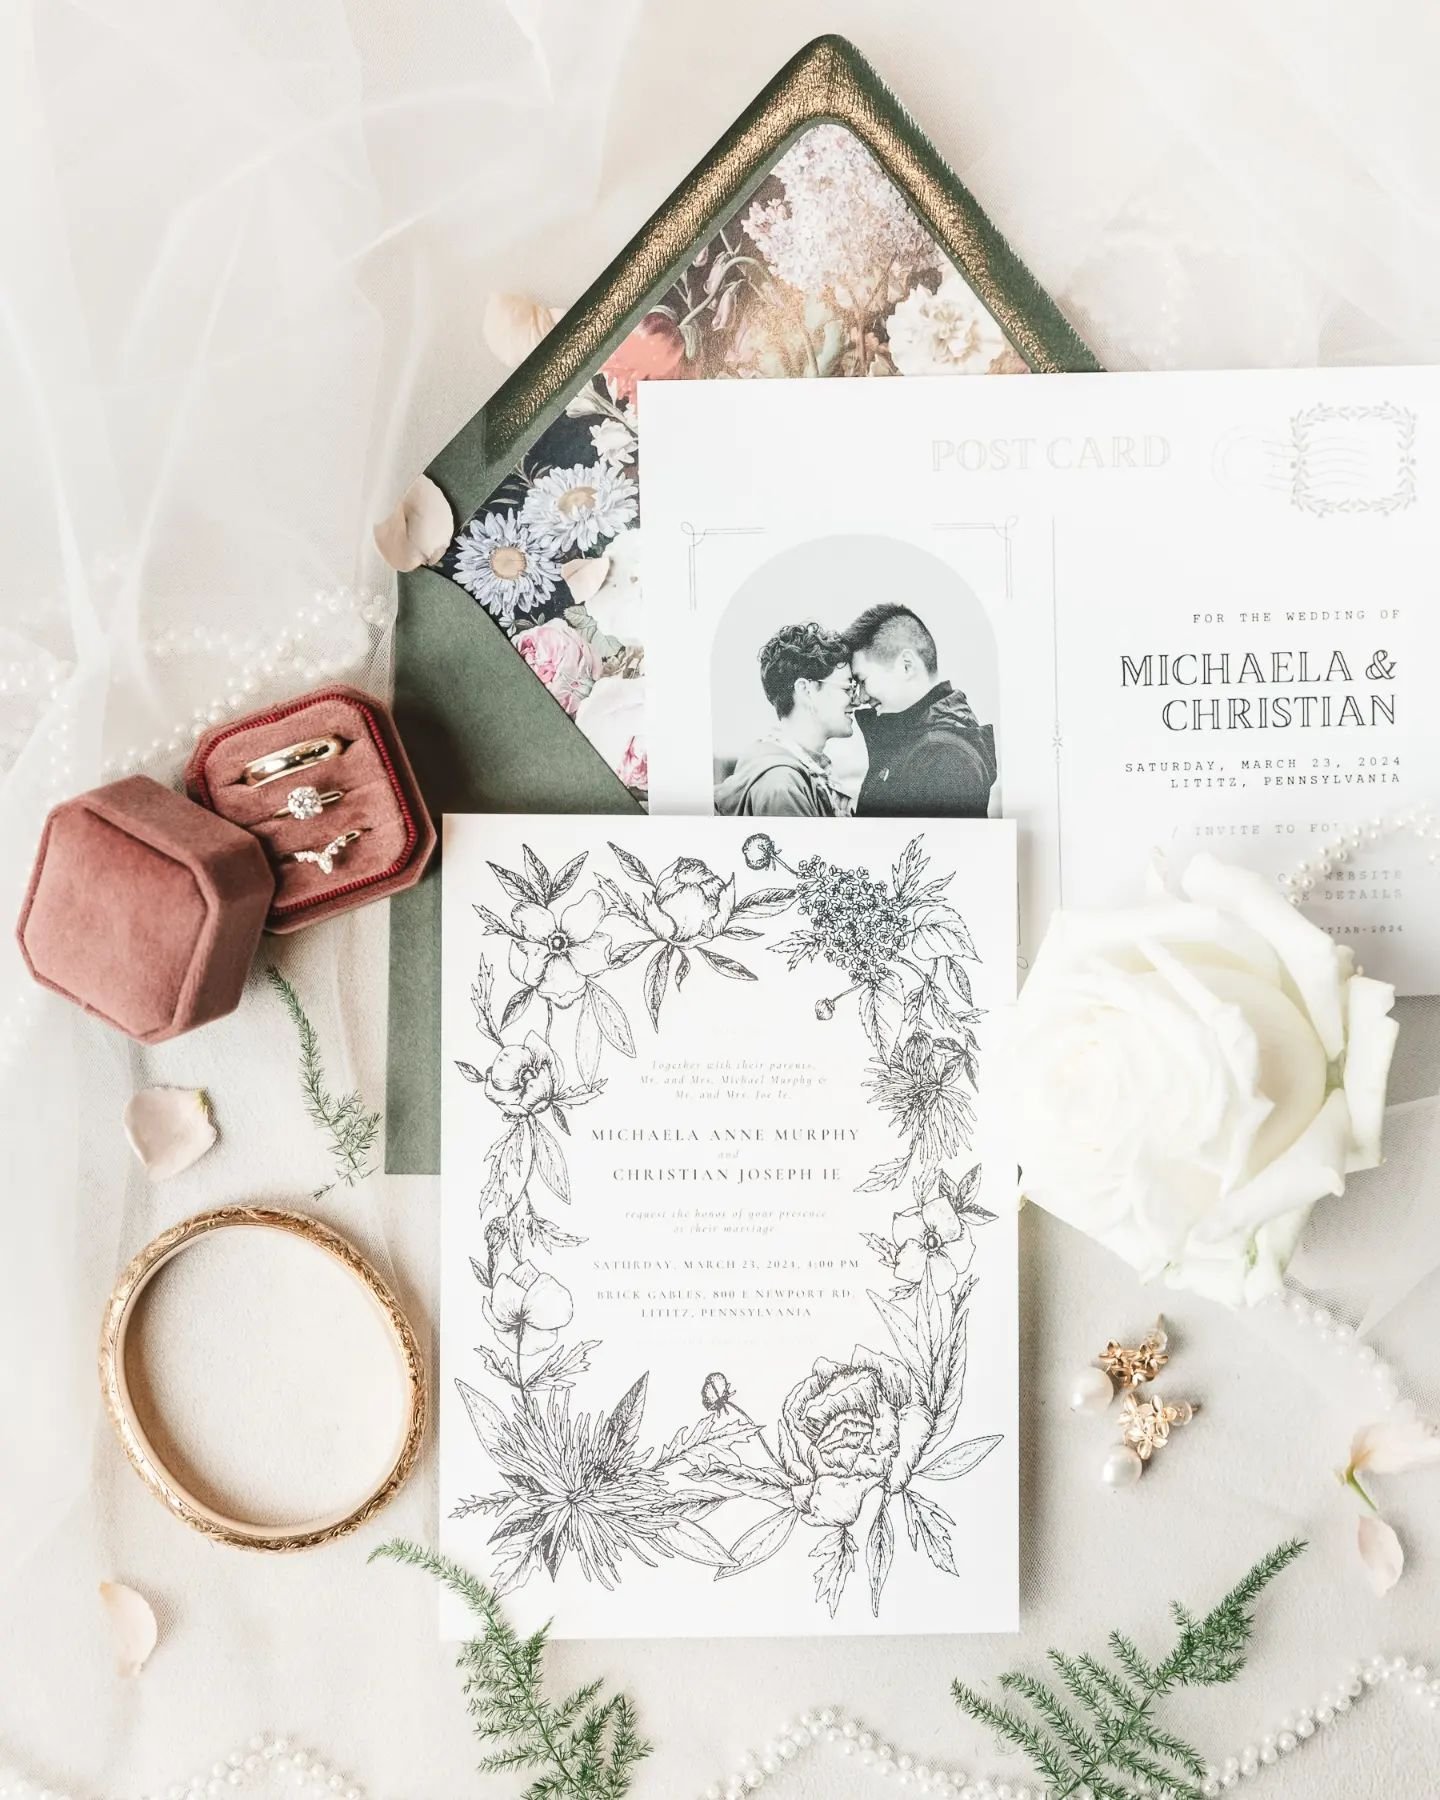 Wedding Wednesday coming to you with a glimpse of the details from Christian and Michaela's vintage garden themed wedding. Michaela has such an eye for art and design, and I loved seeing her vision come to life. Side note, growing up I was never real